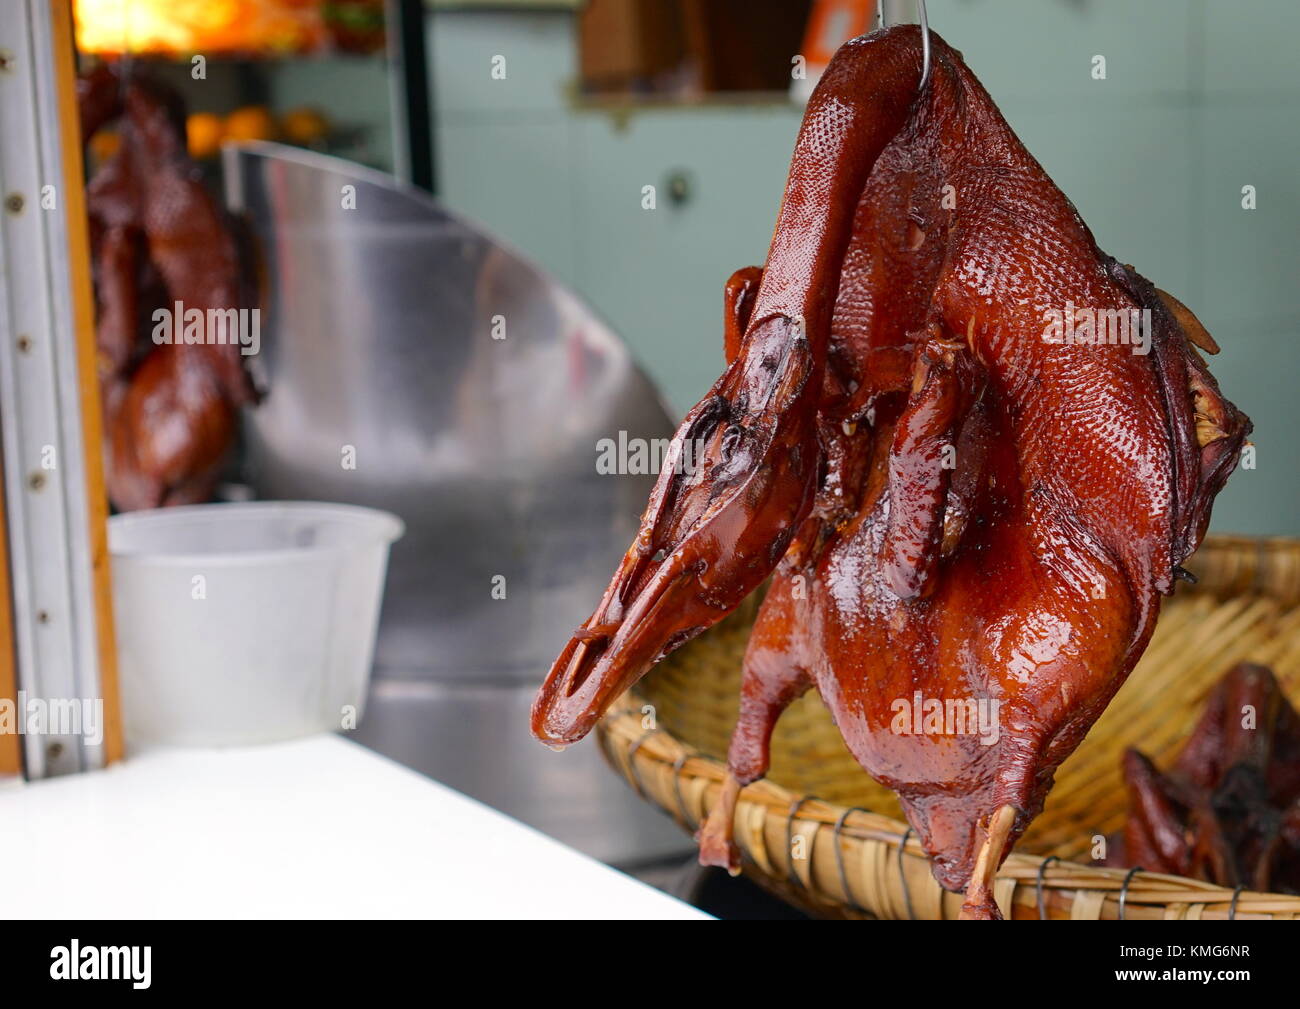 Hanging roasted duck street food in China Stock Photo